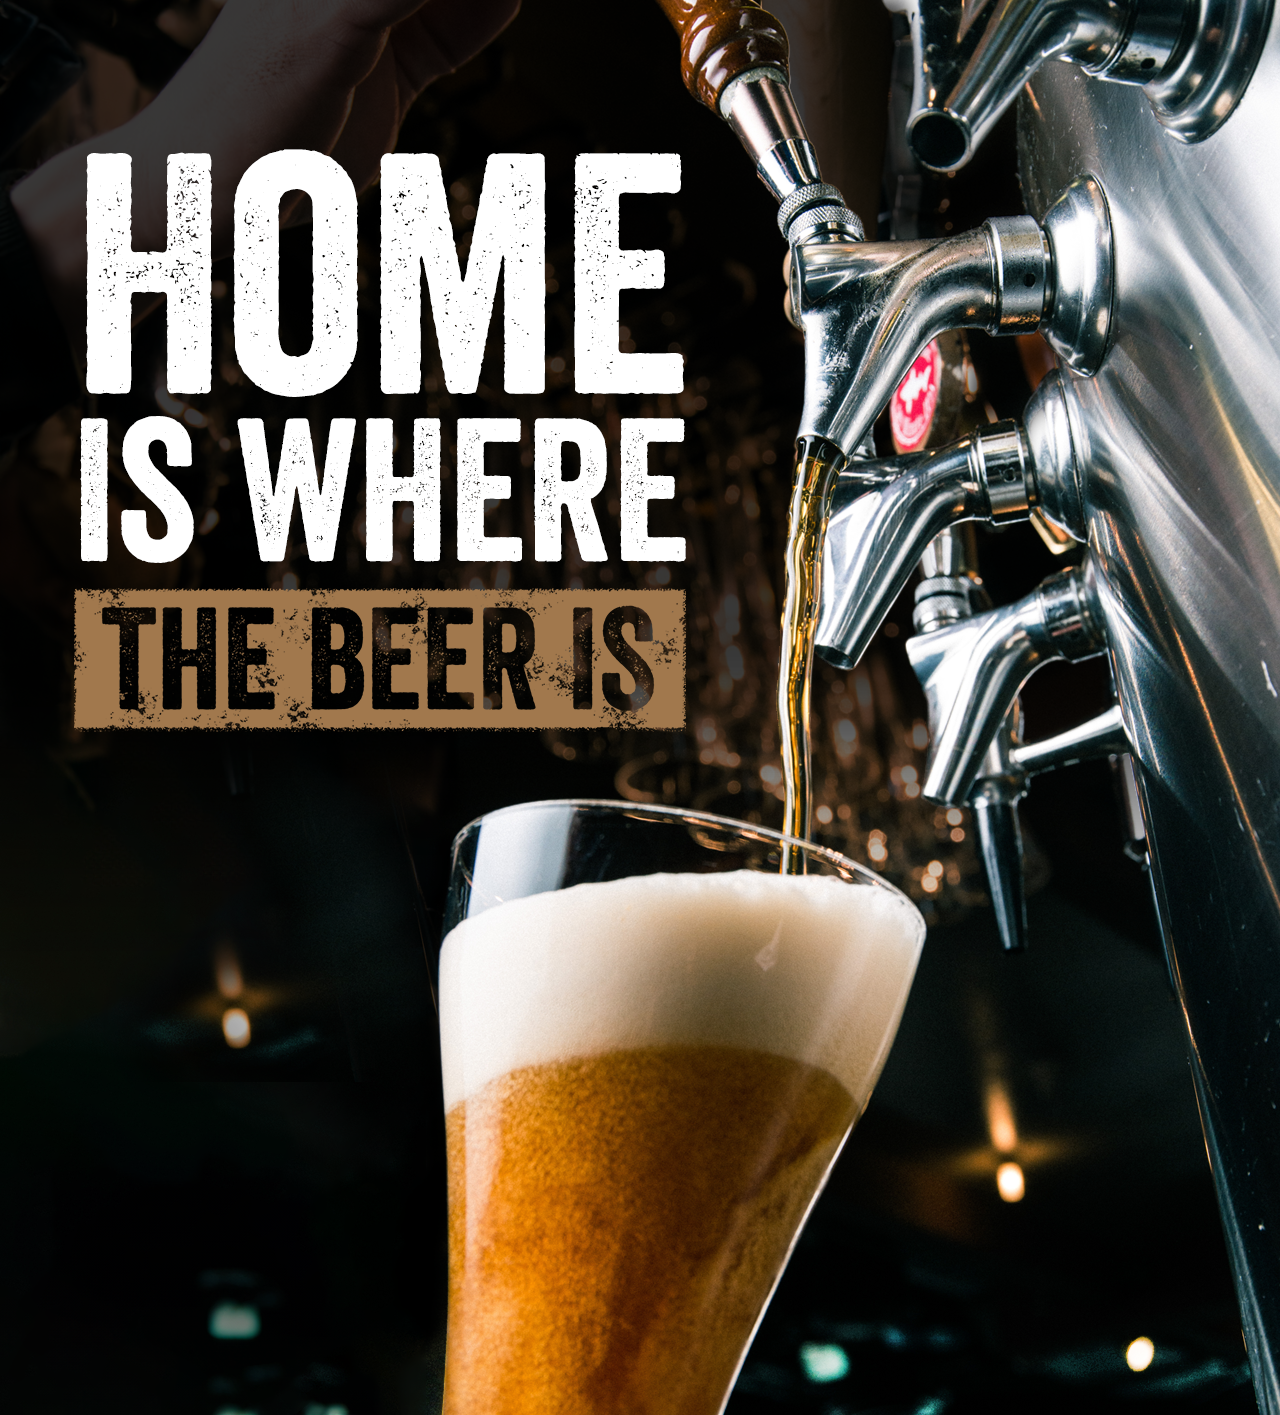 Home is where the Beer is